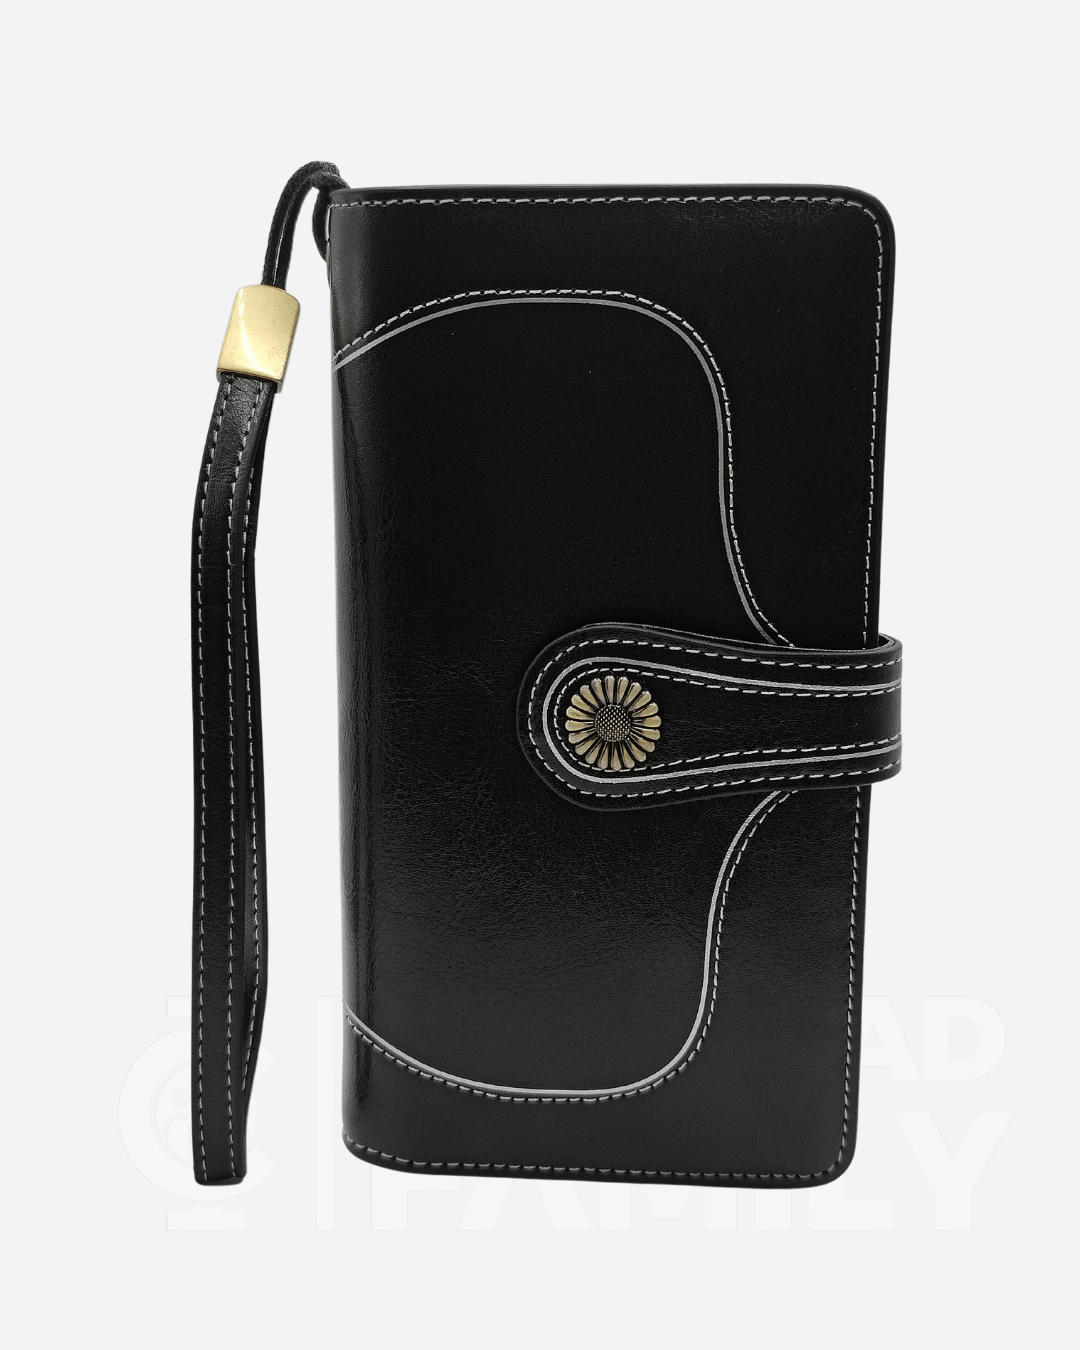 Black RFID blocking leather wallet with gold clasp